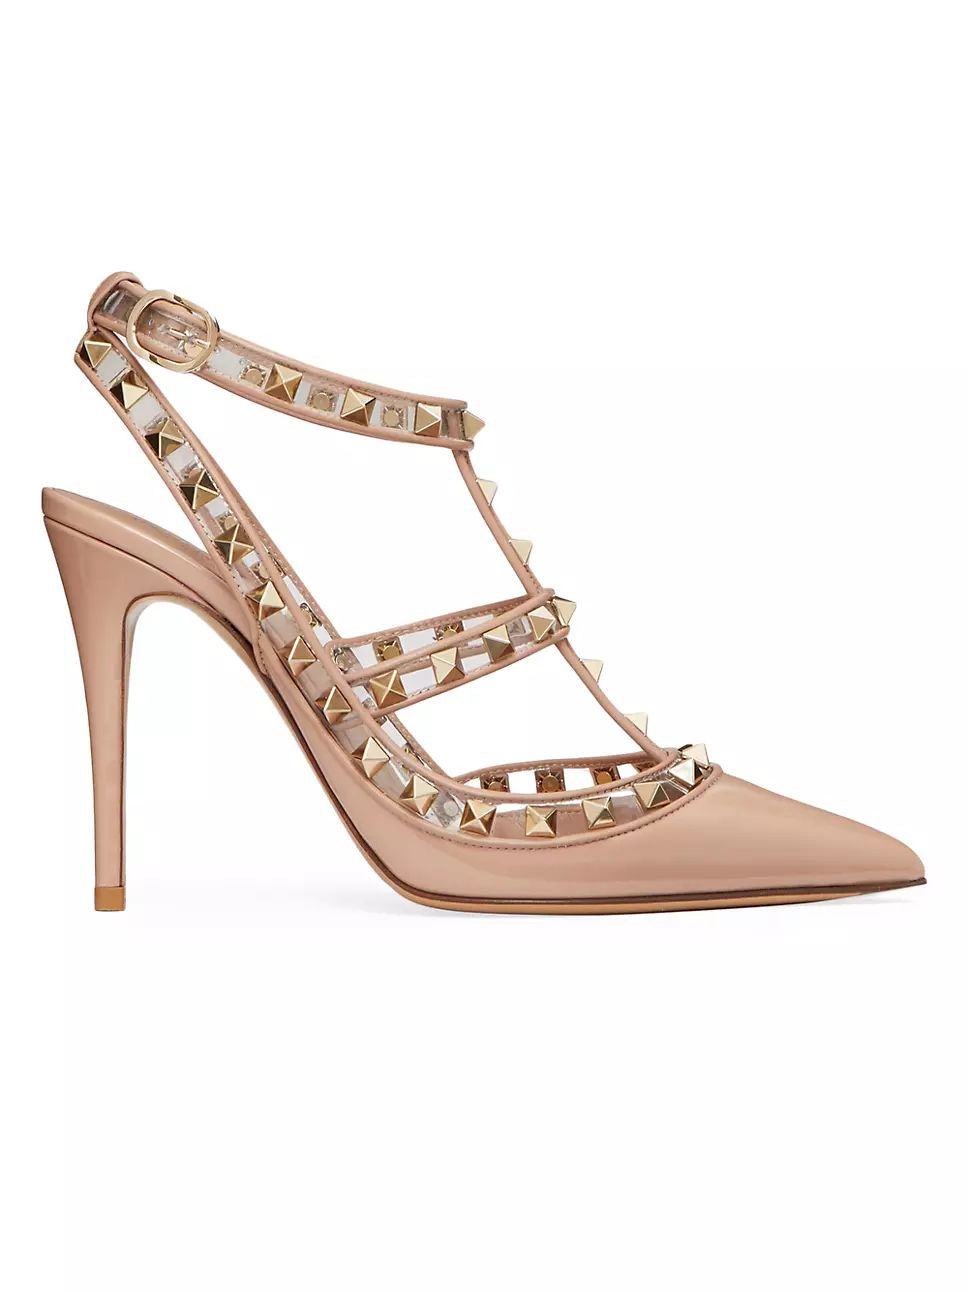 Rockstud Pumps In Patent Leather And Polymeric Material With Straps 100 MM | Saks Fifth Avenue